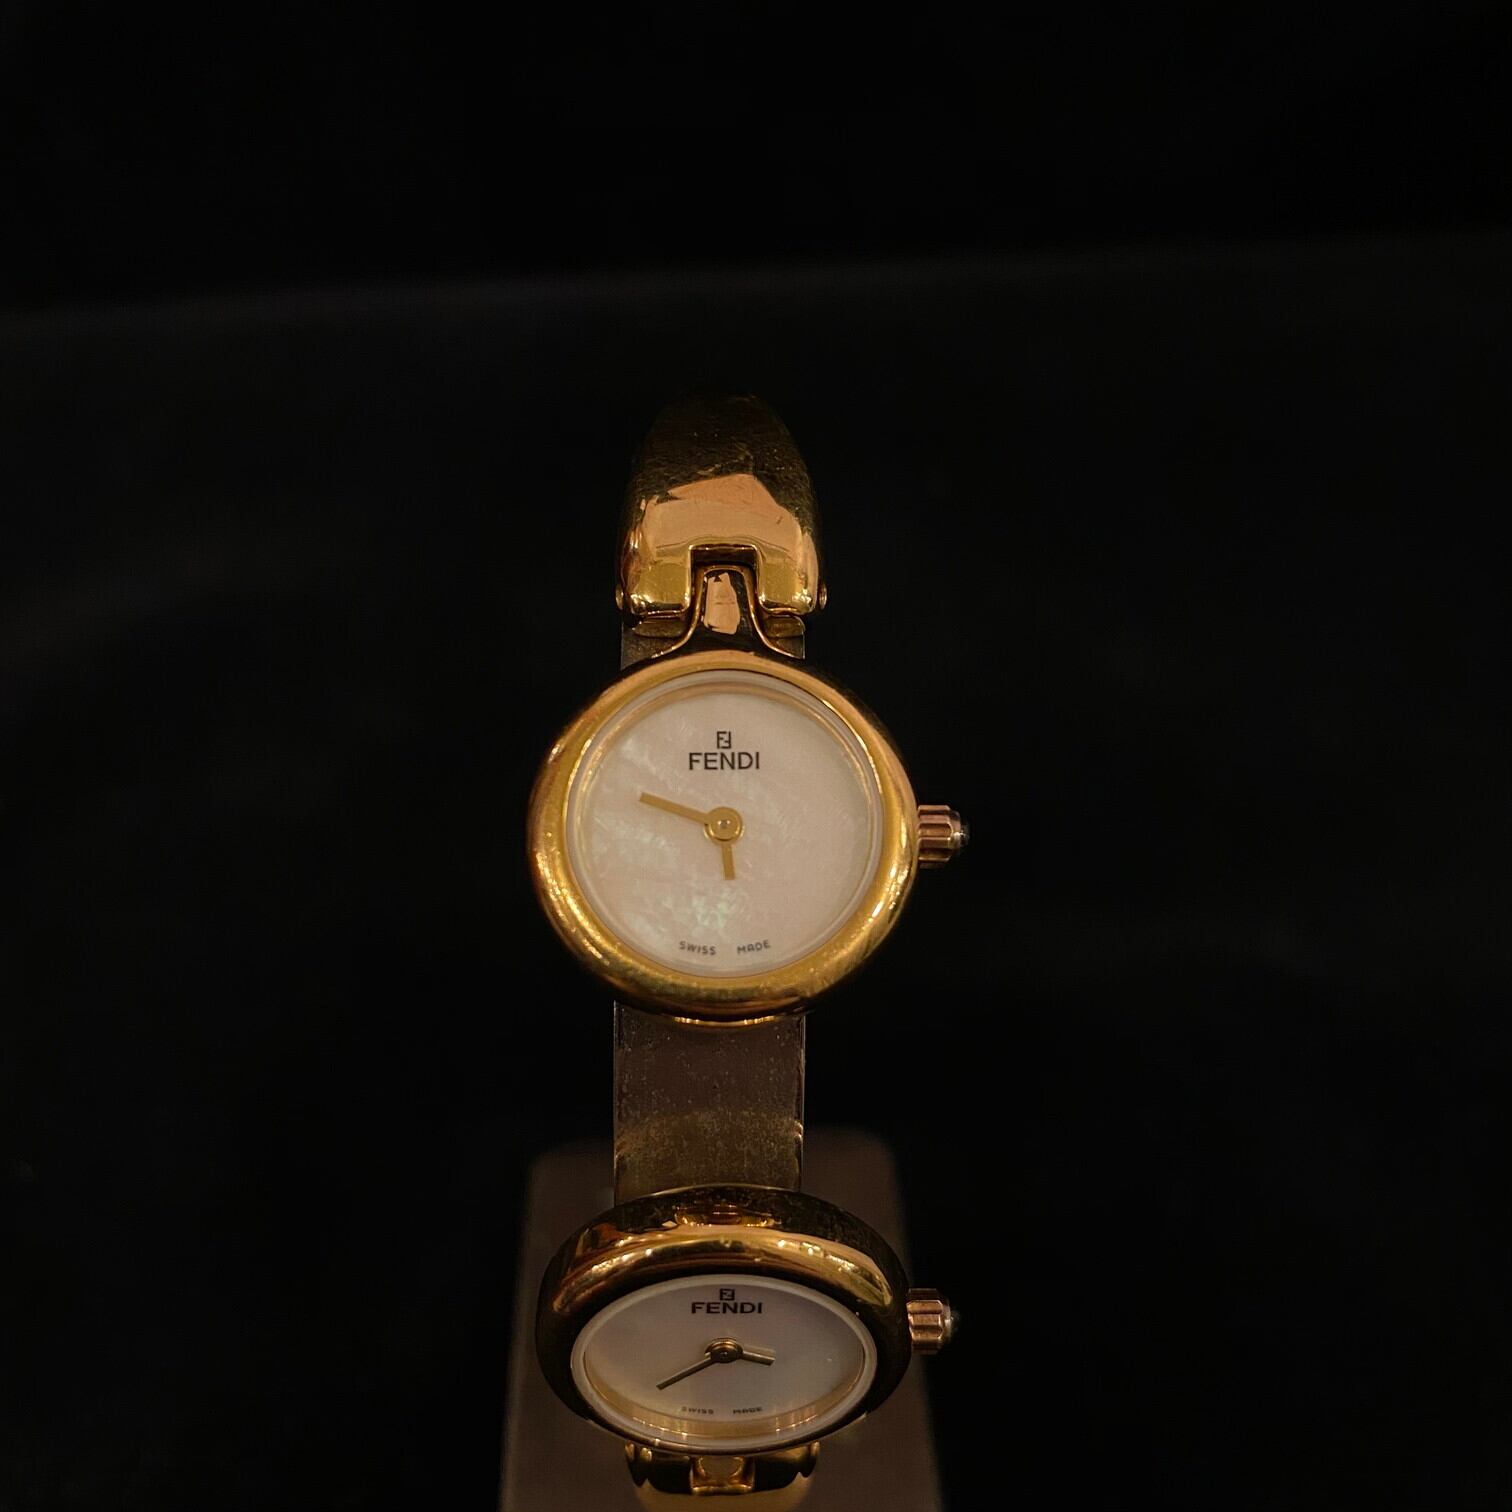 FENDI Double Face/Dual Time-Zone Watch -Rare!- | CARBOOTS